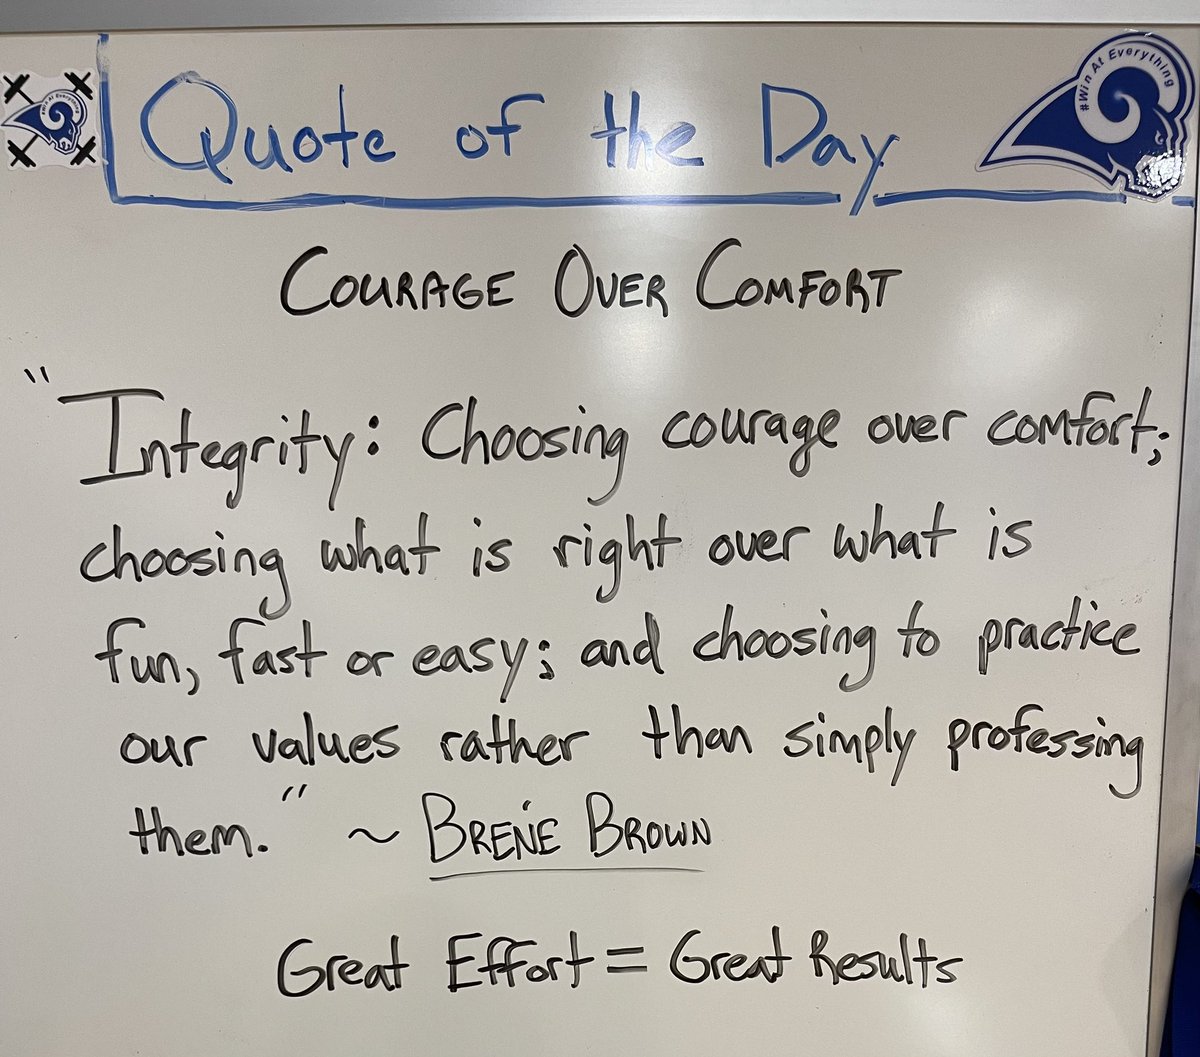 Great Effort = Great Results Condition ourselves to choose Courage over Comfort